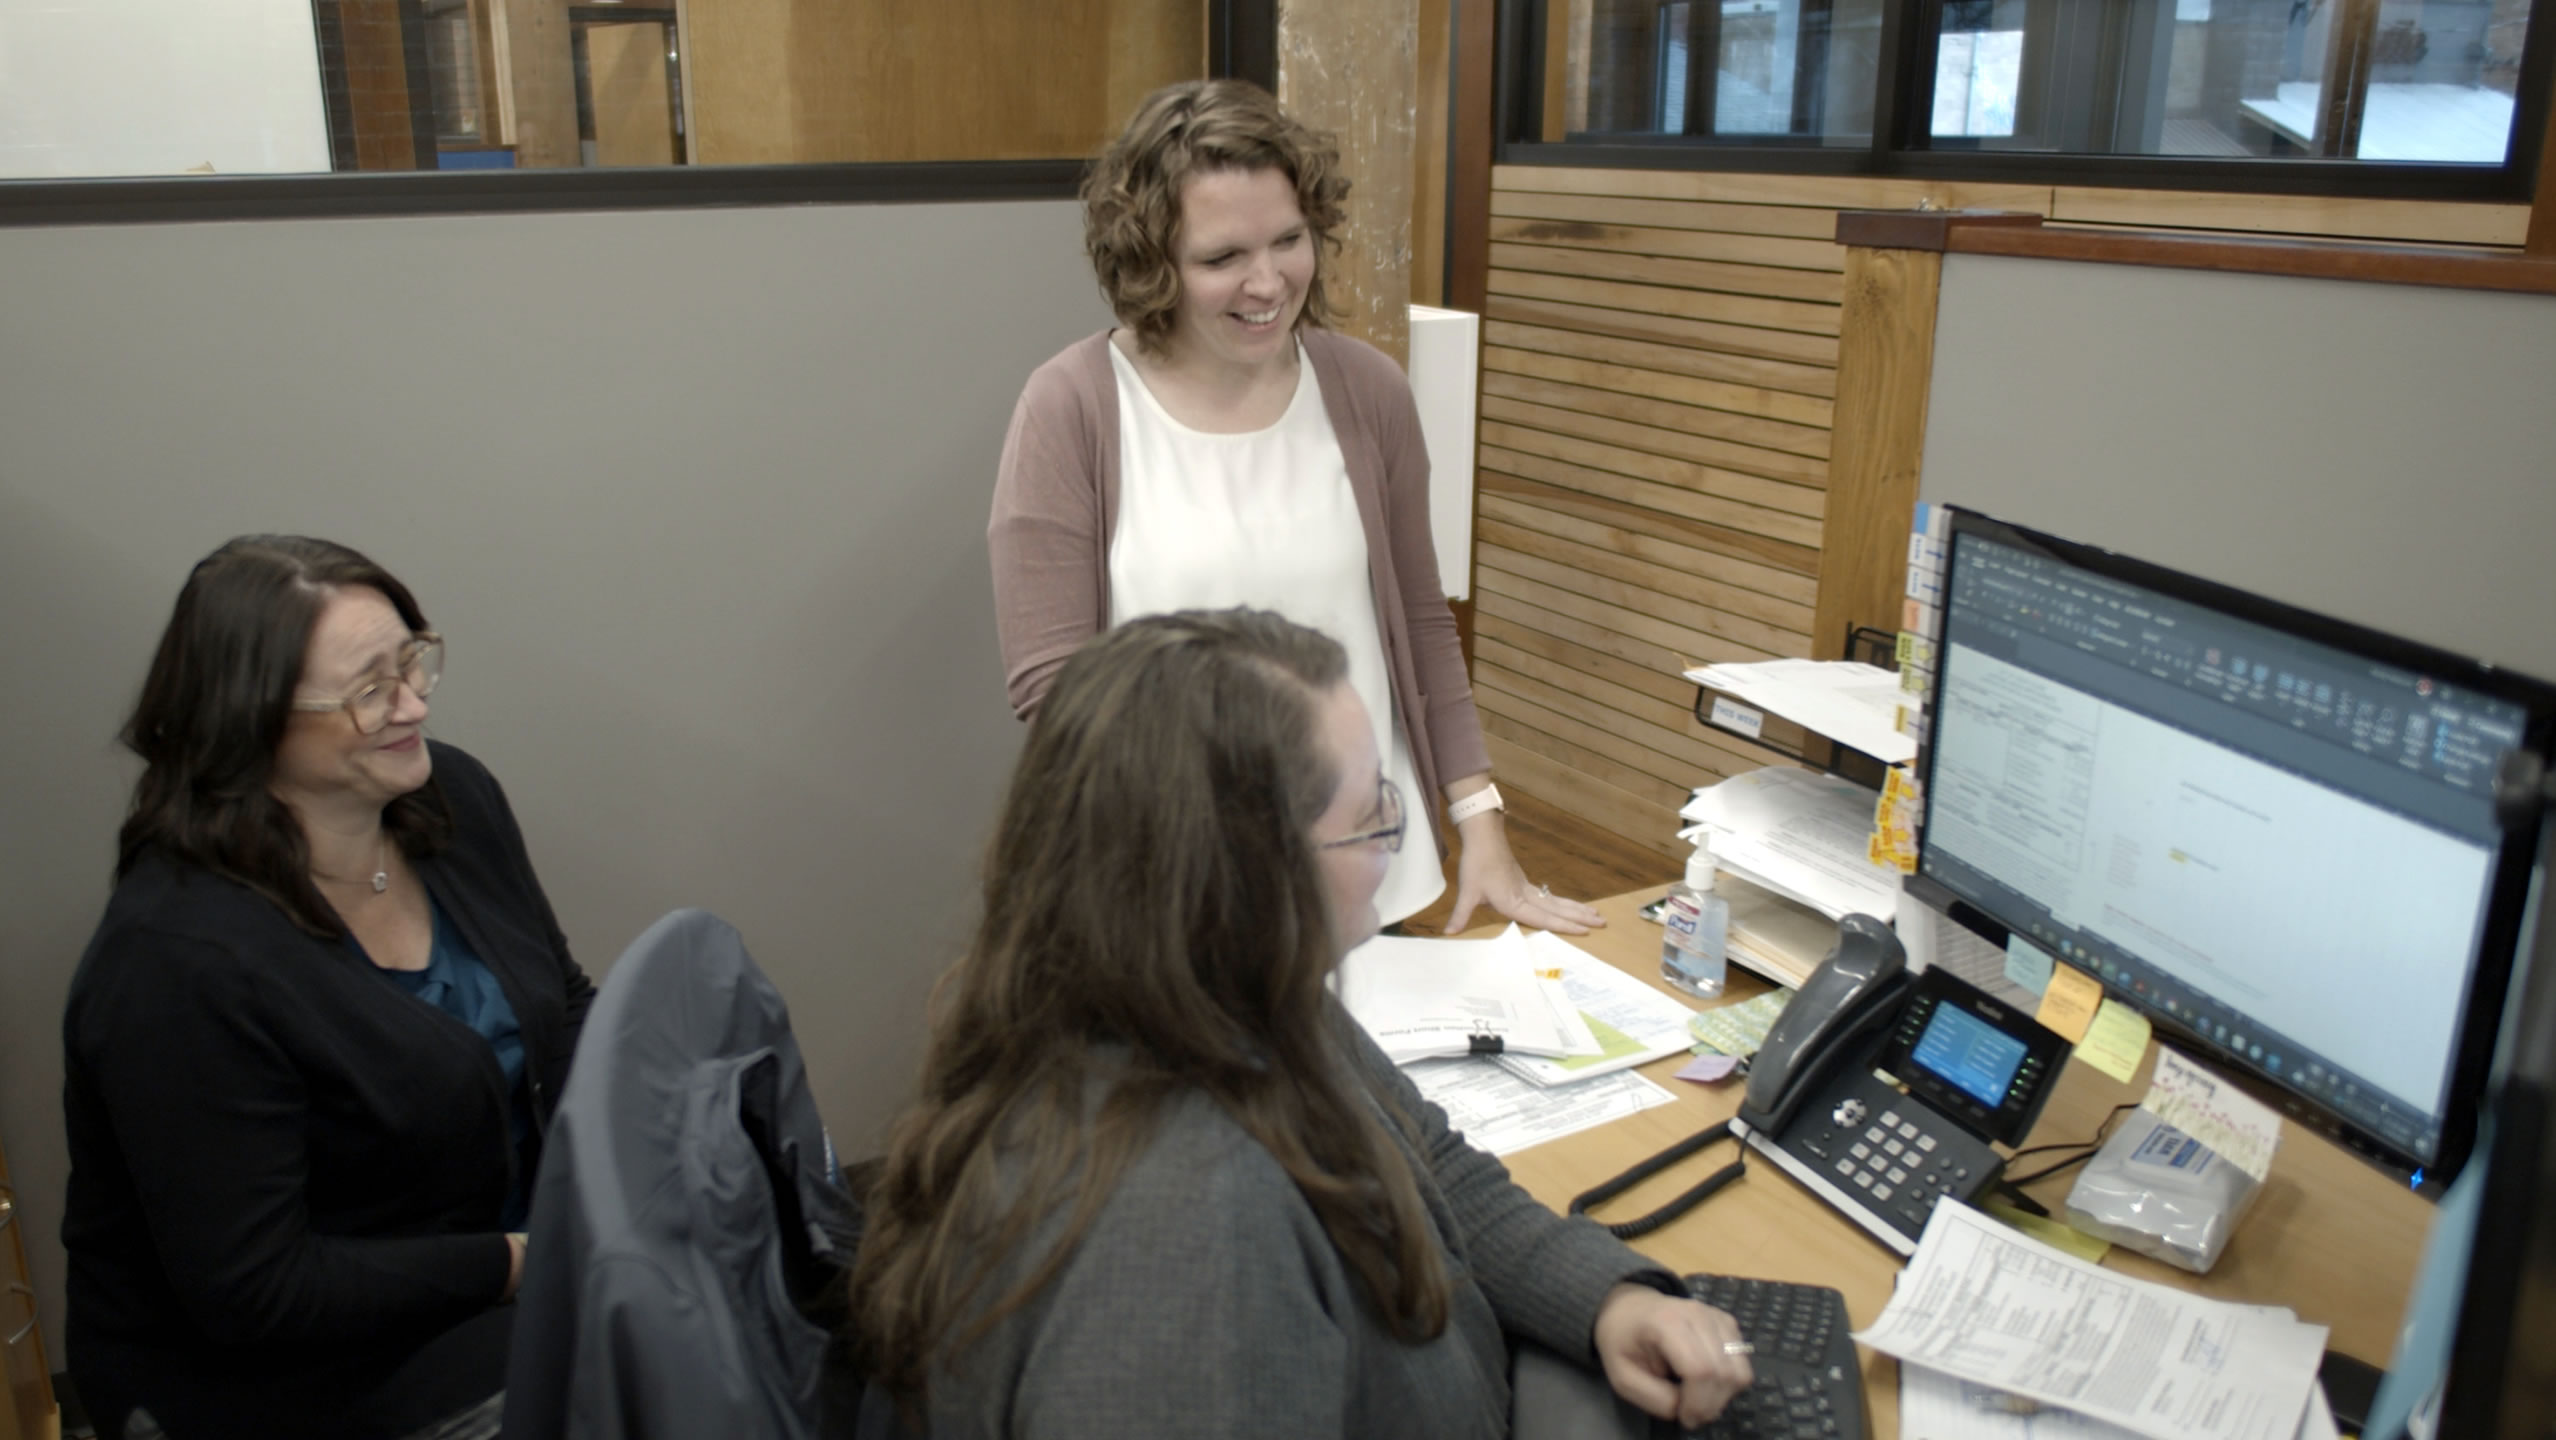 three employees reacting positively to information on a computer screen